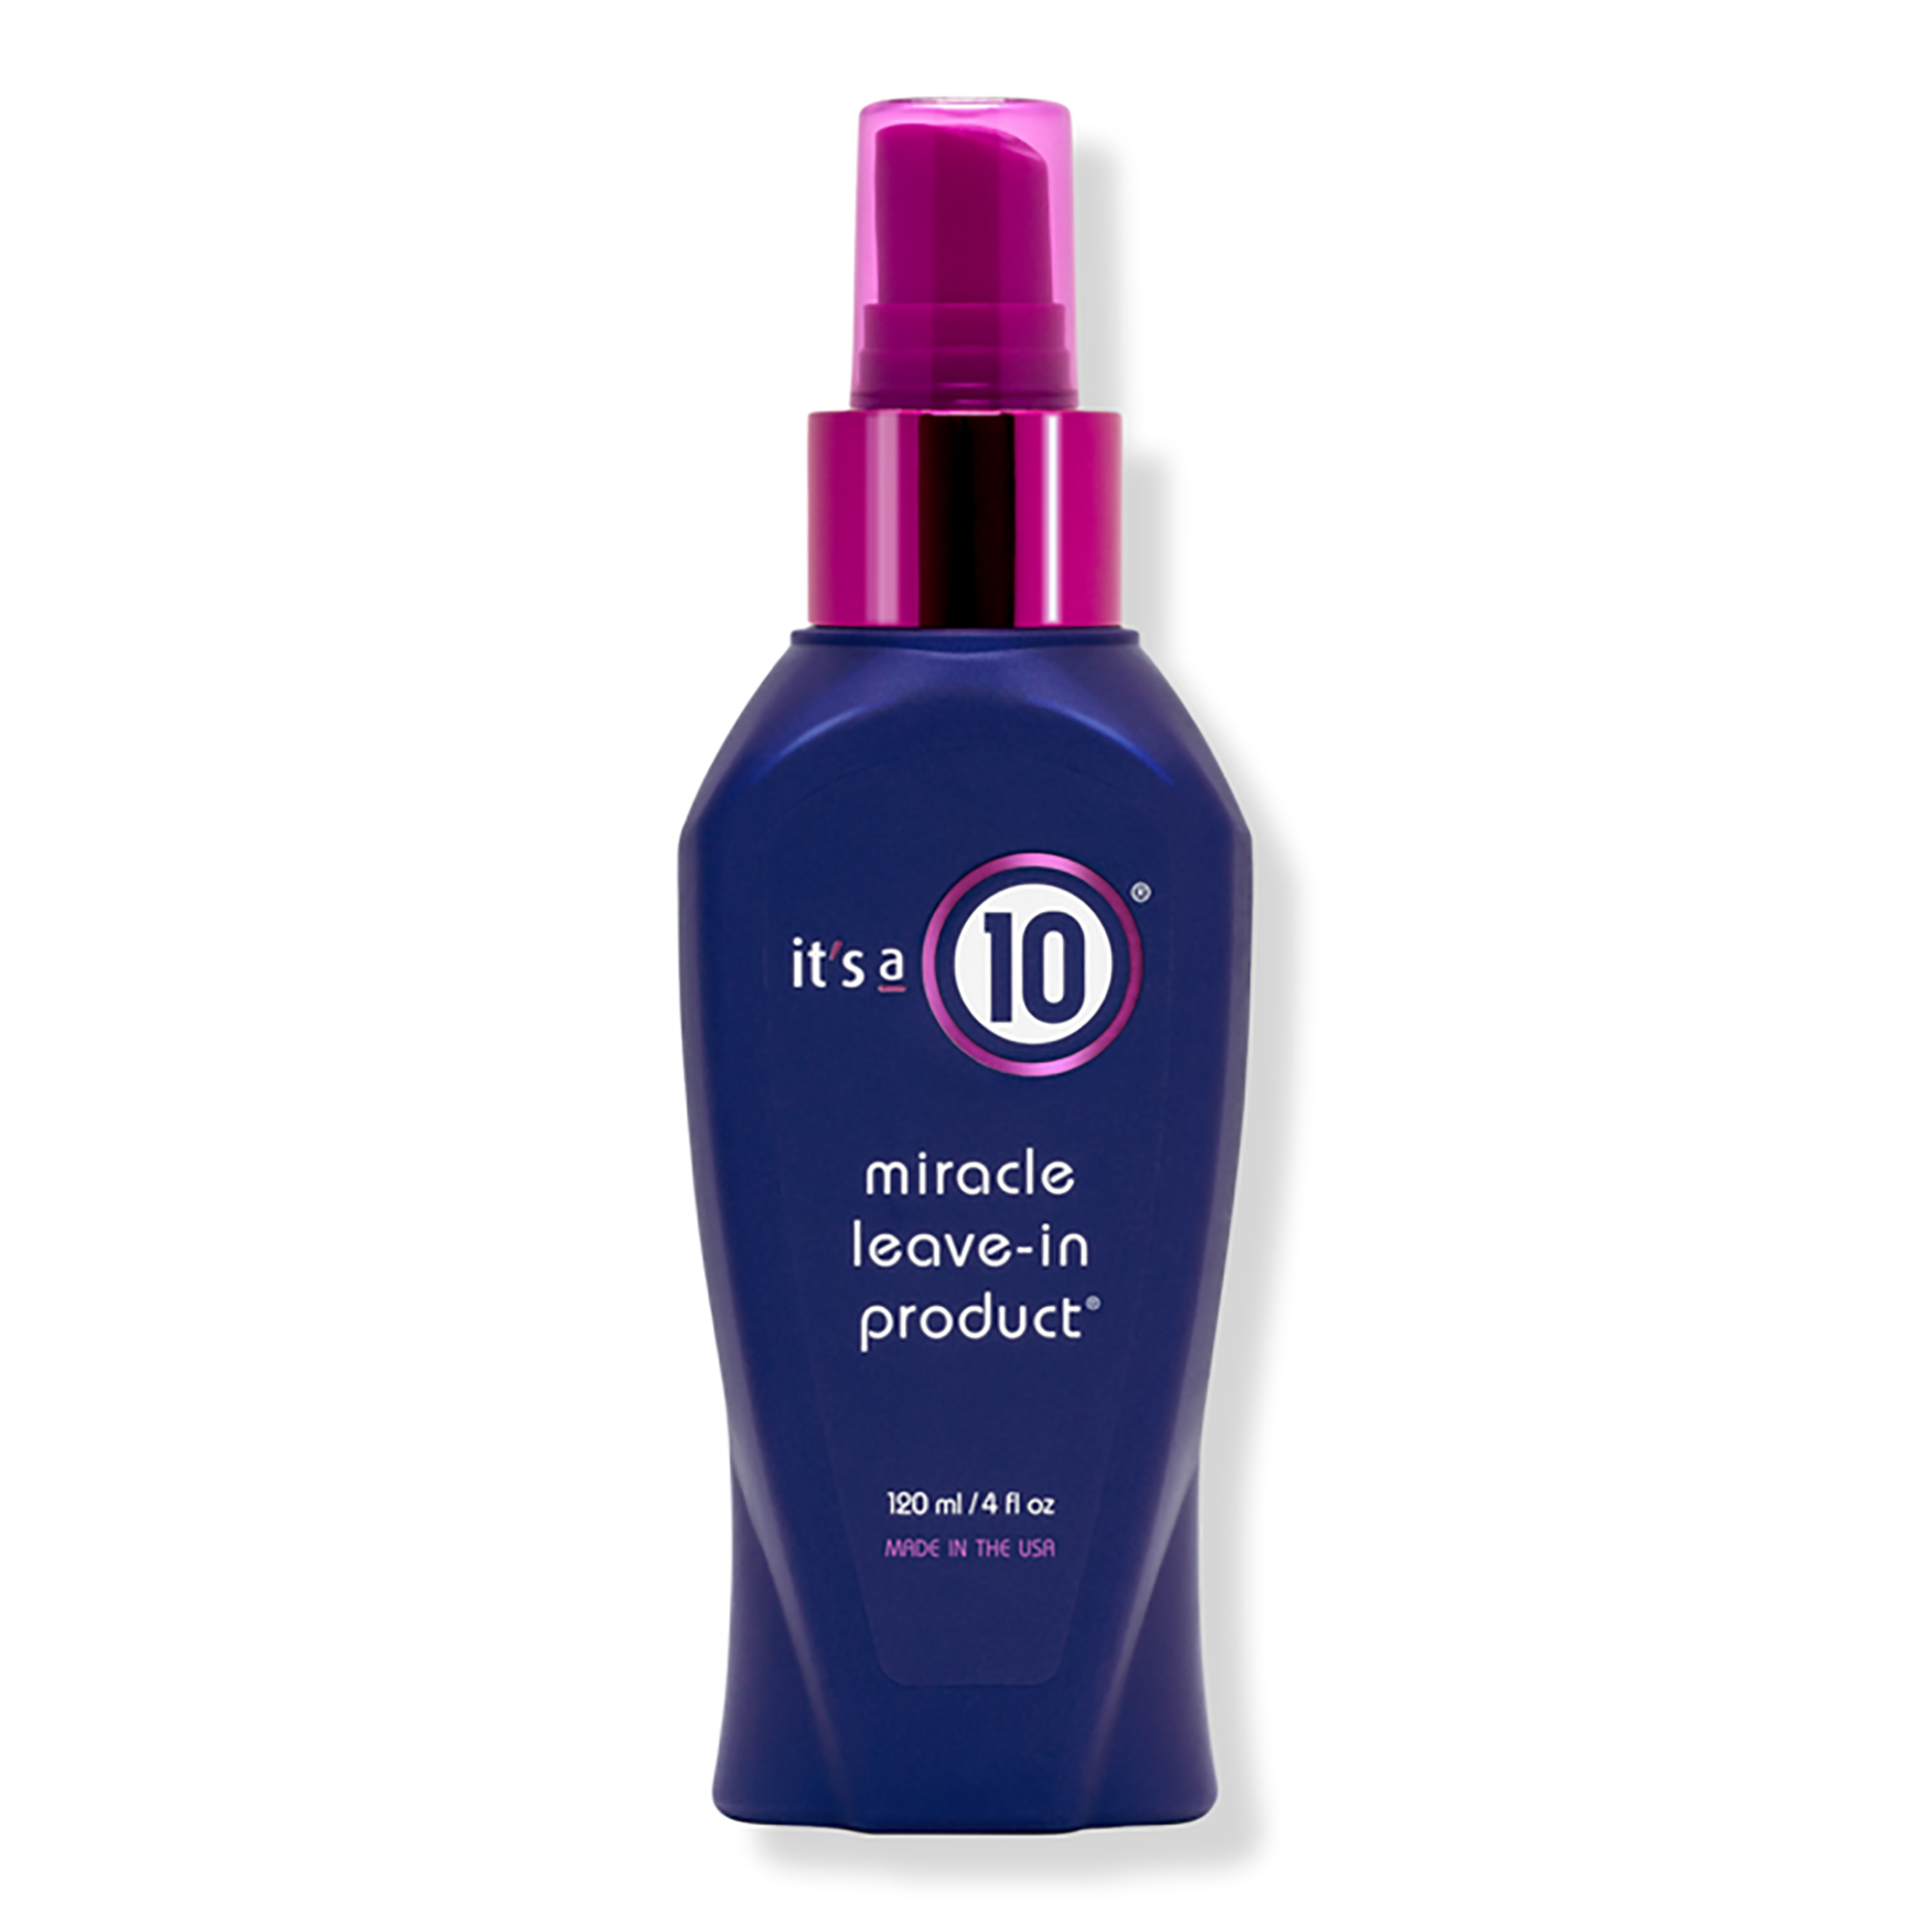 It's a 10 Miracle Leave-In Treatment Spray / 04